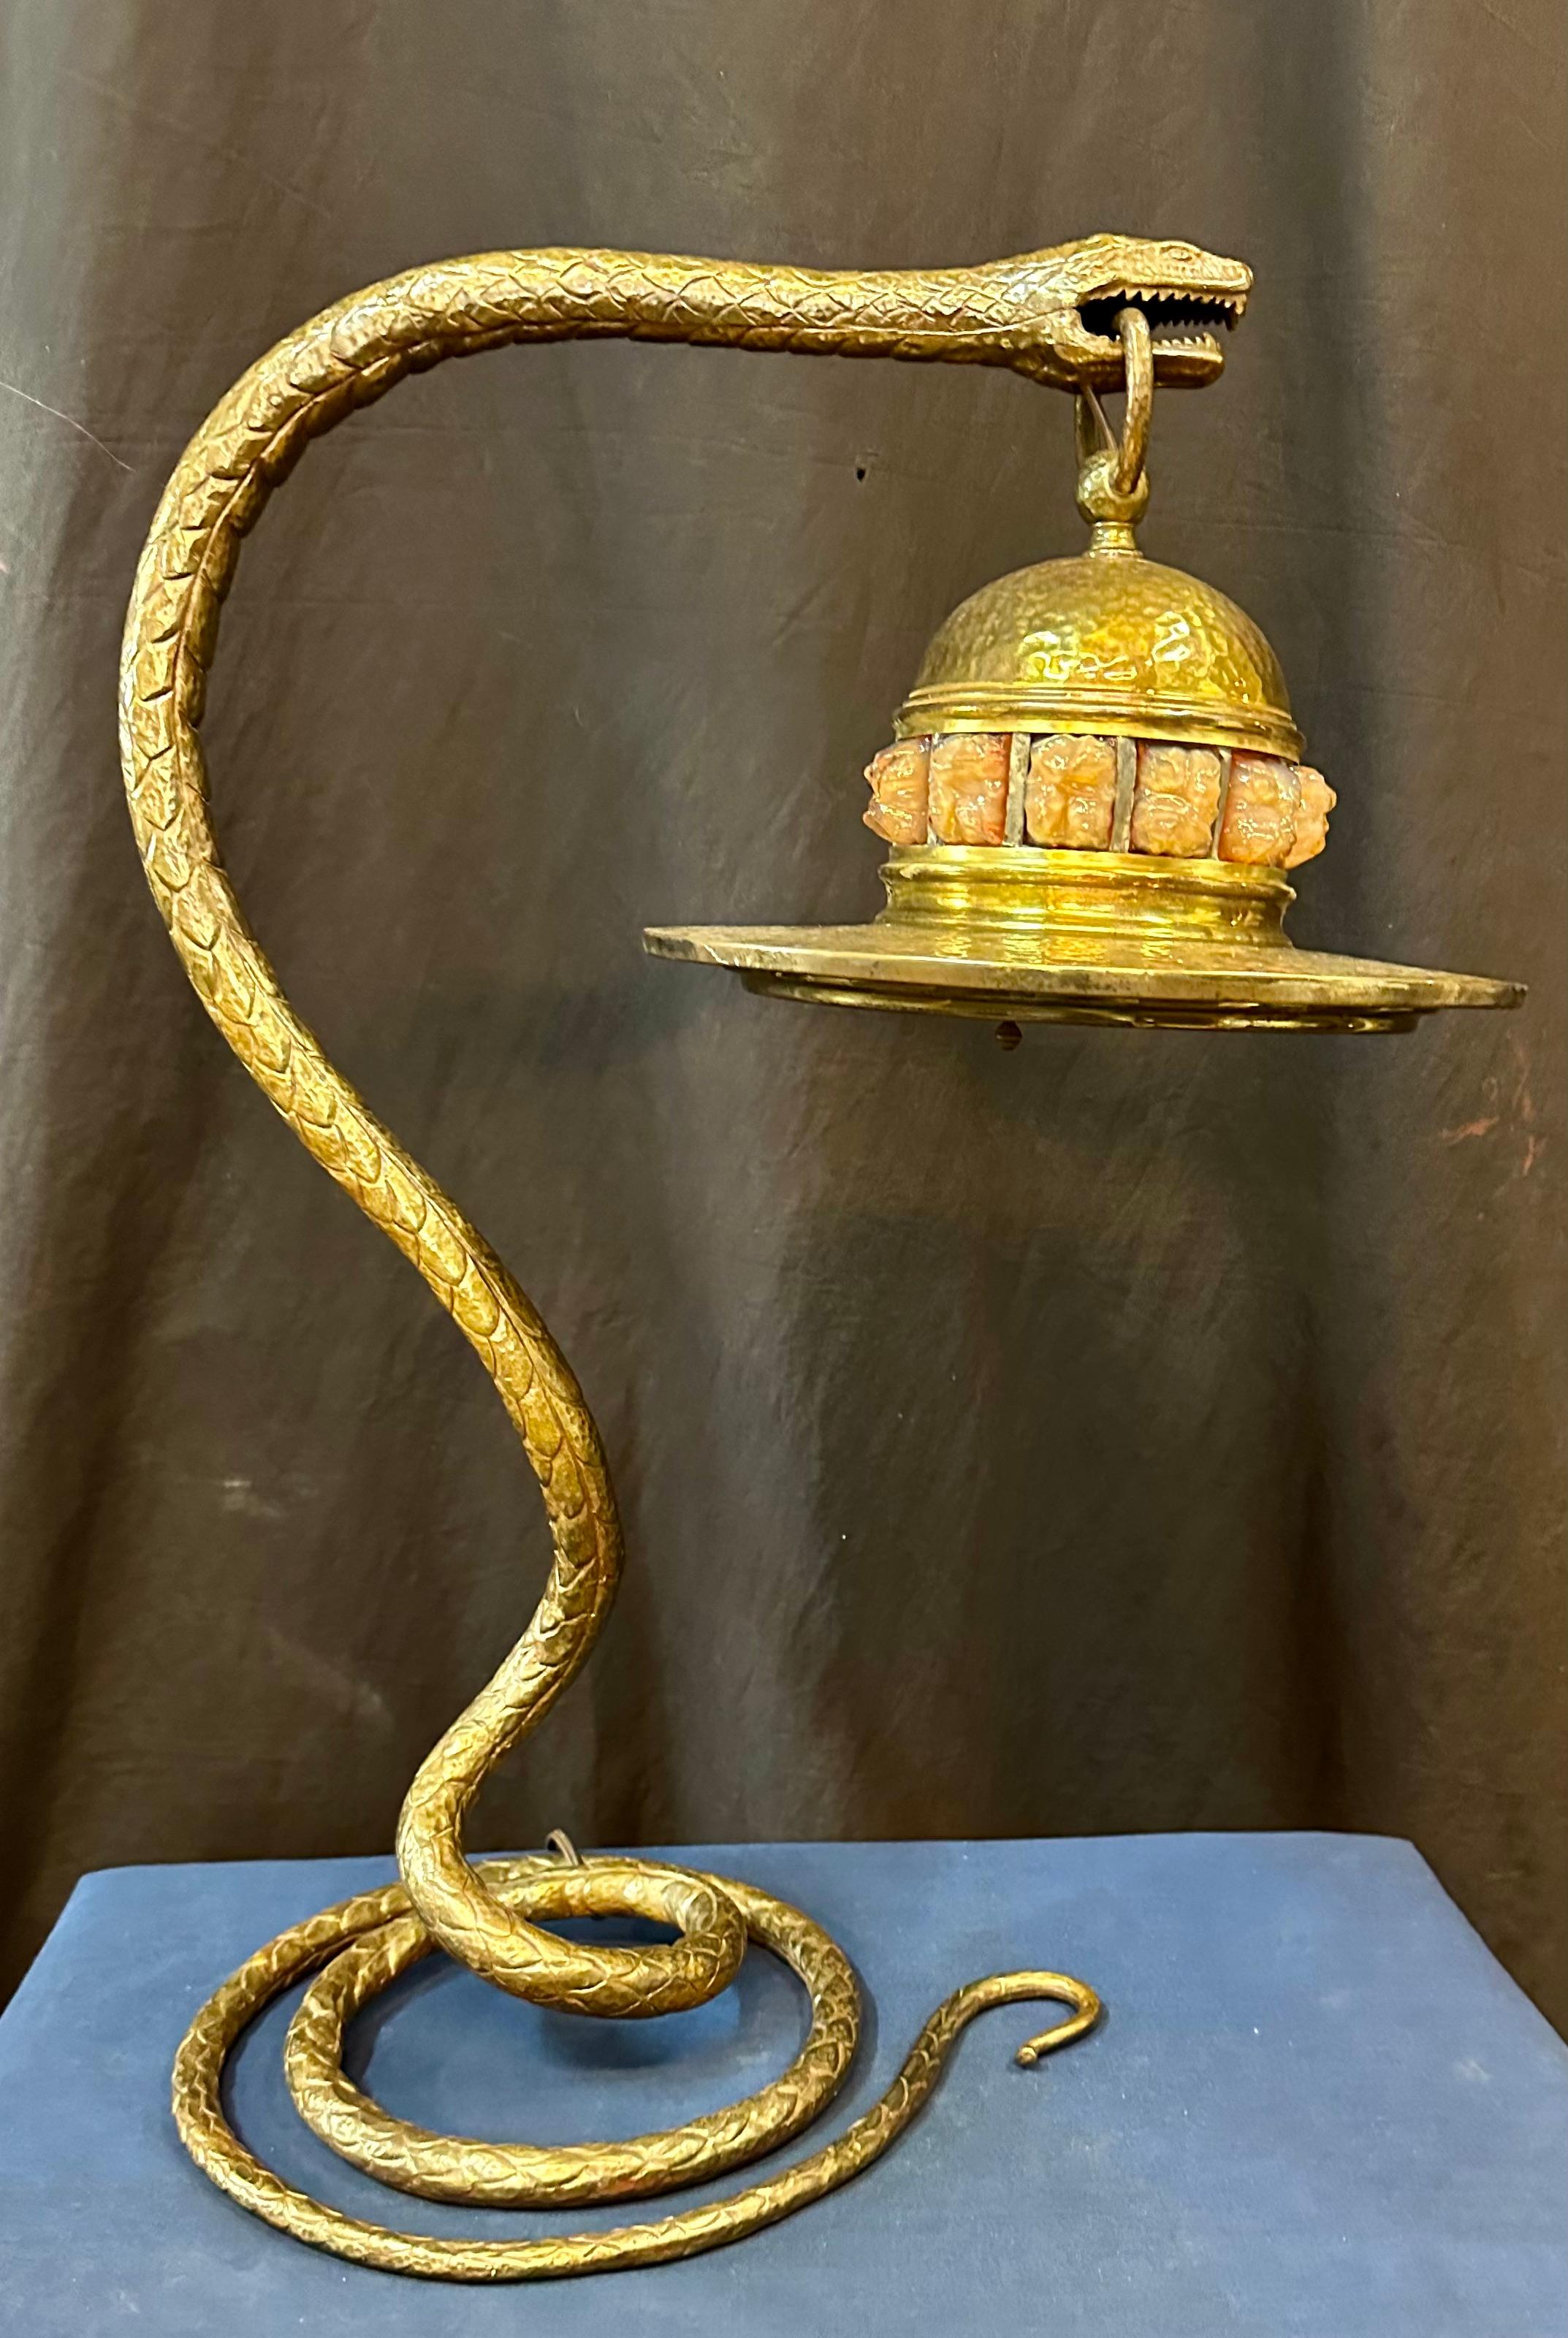 This vintage golden bronze French table lamp dates from the early 20th century. A realistically rendered sculpted bronze coiled snake is holding the top ring of a hand hammered lamp shade in its mouth. This shade is designed with a bold band of